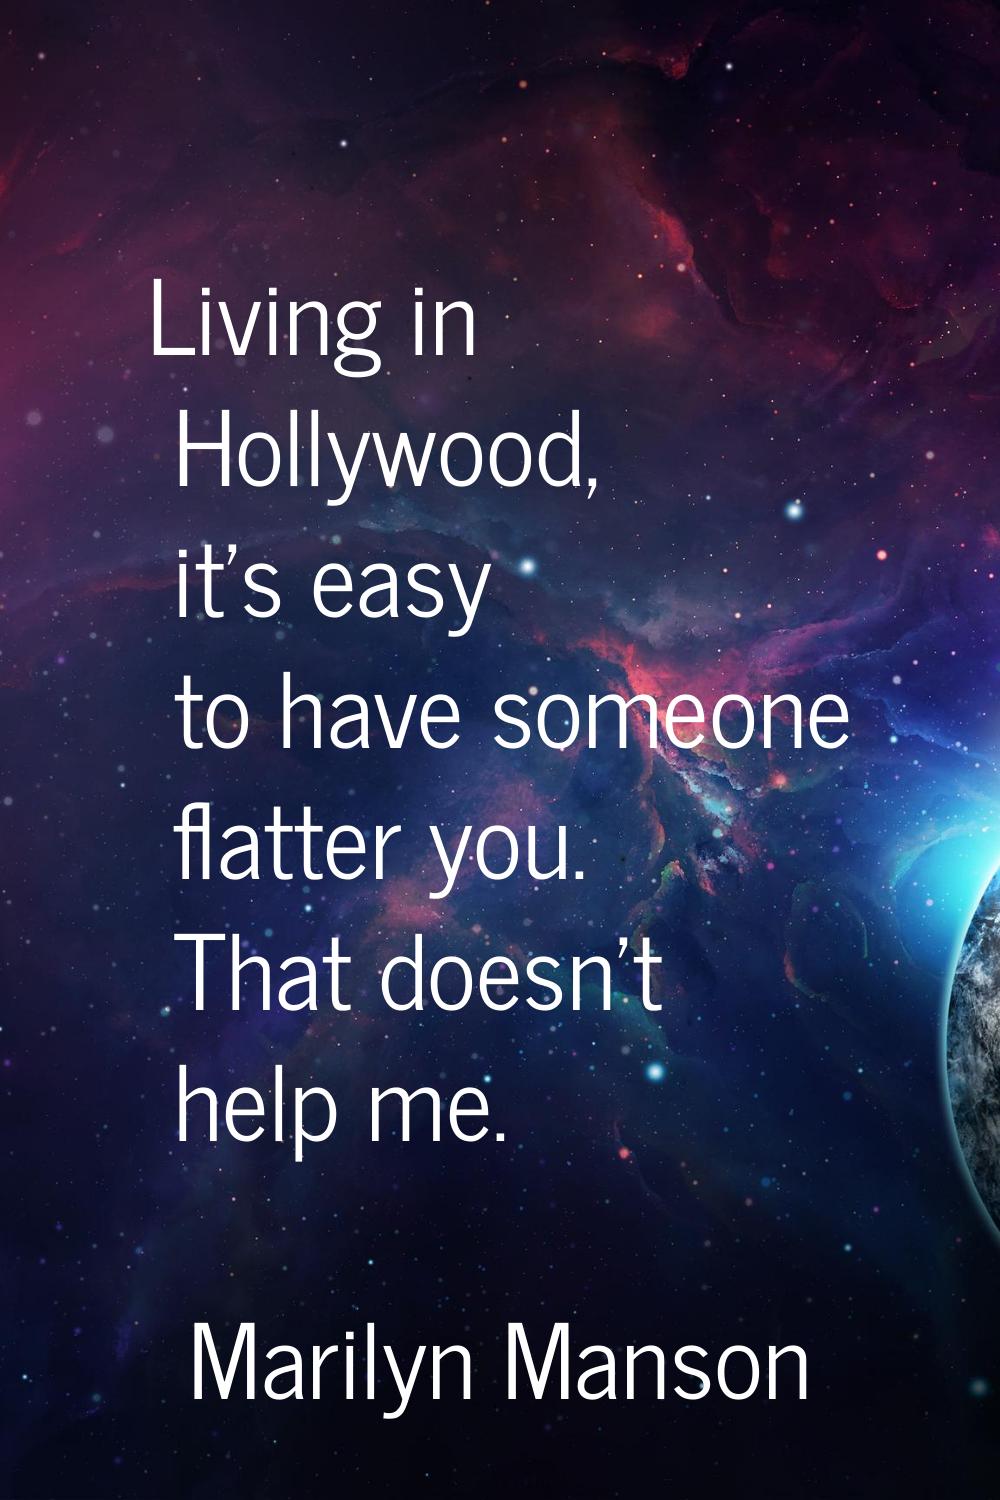 Living in Hollywood, it's easy to have someone flatter you. That doesn't help me.